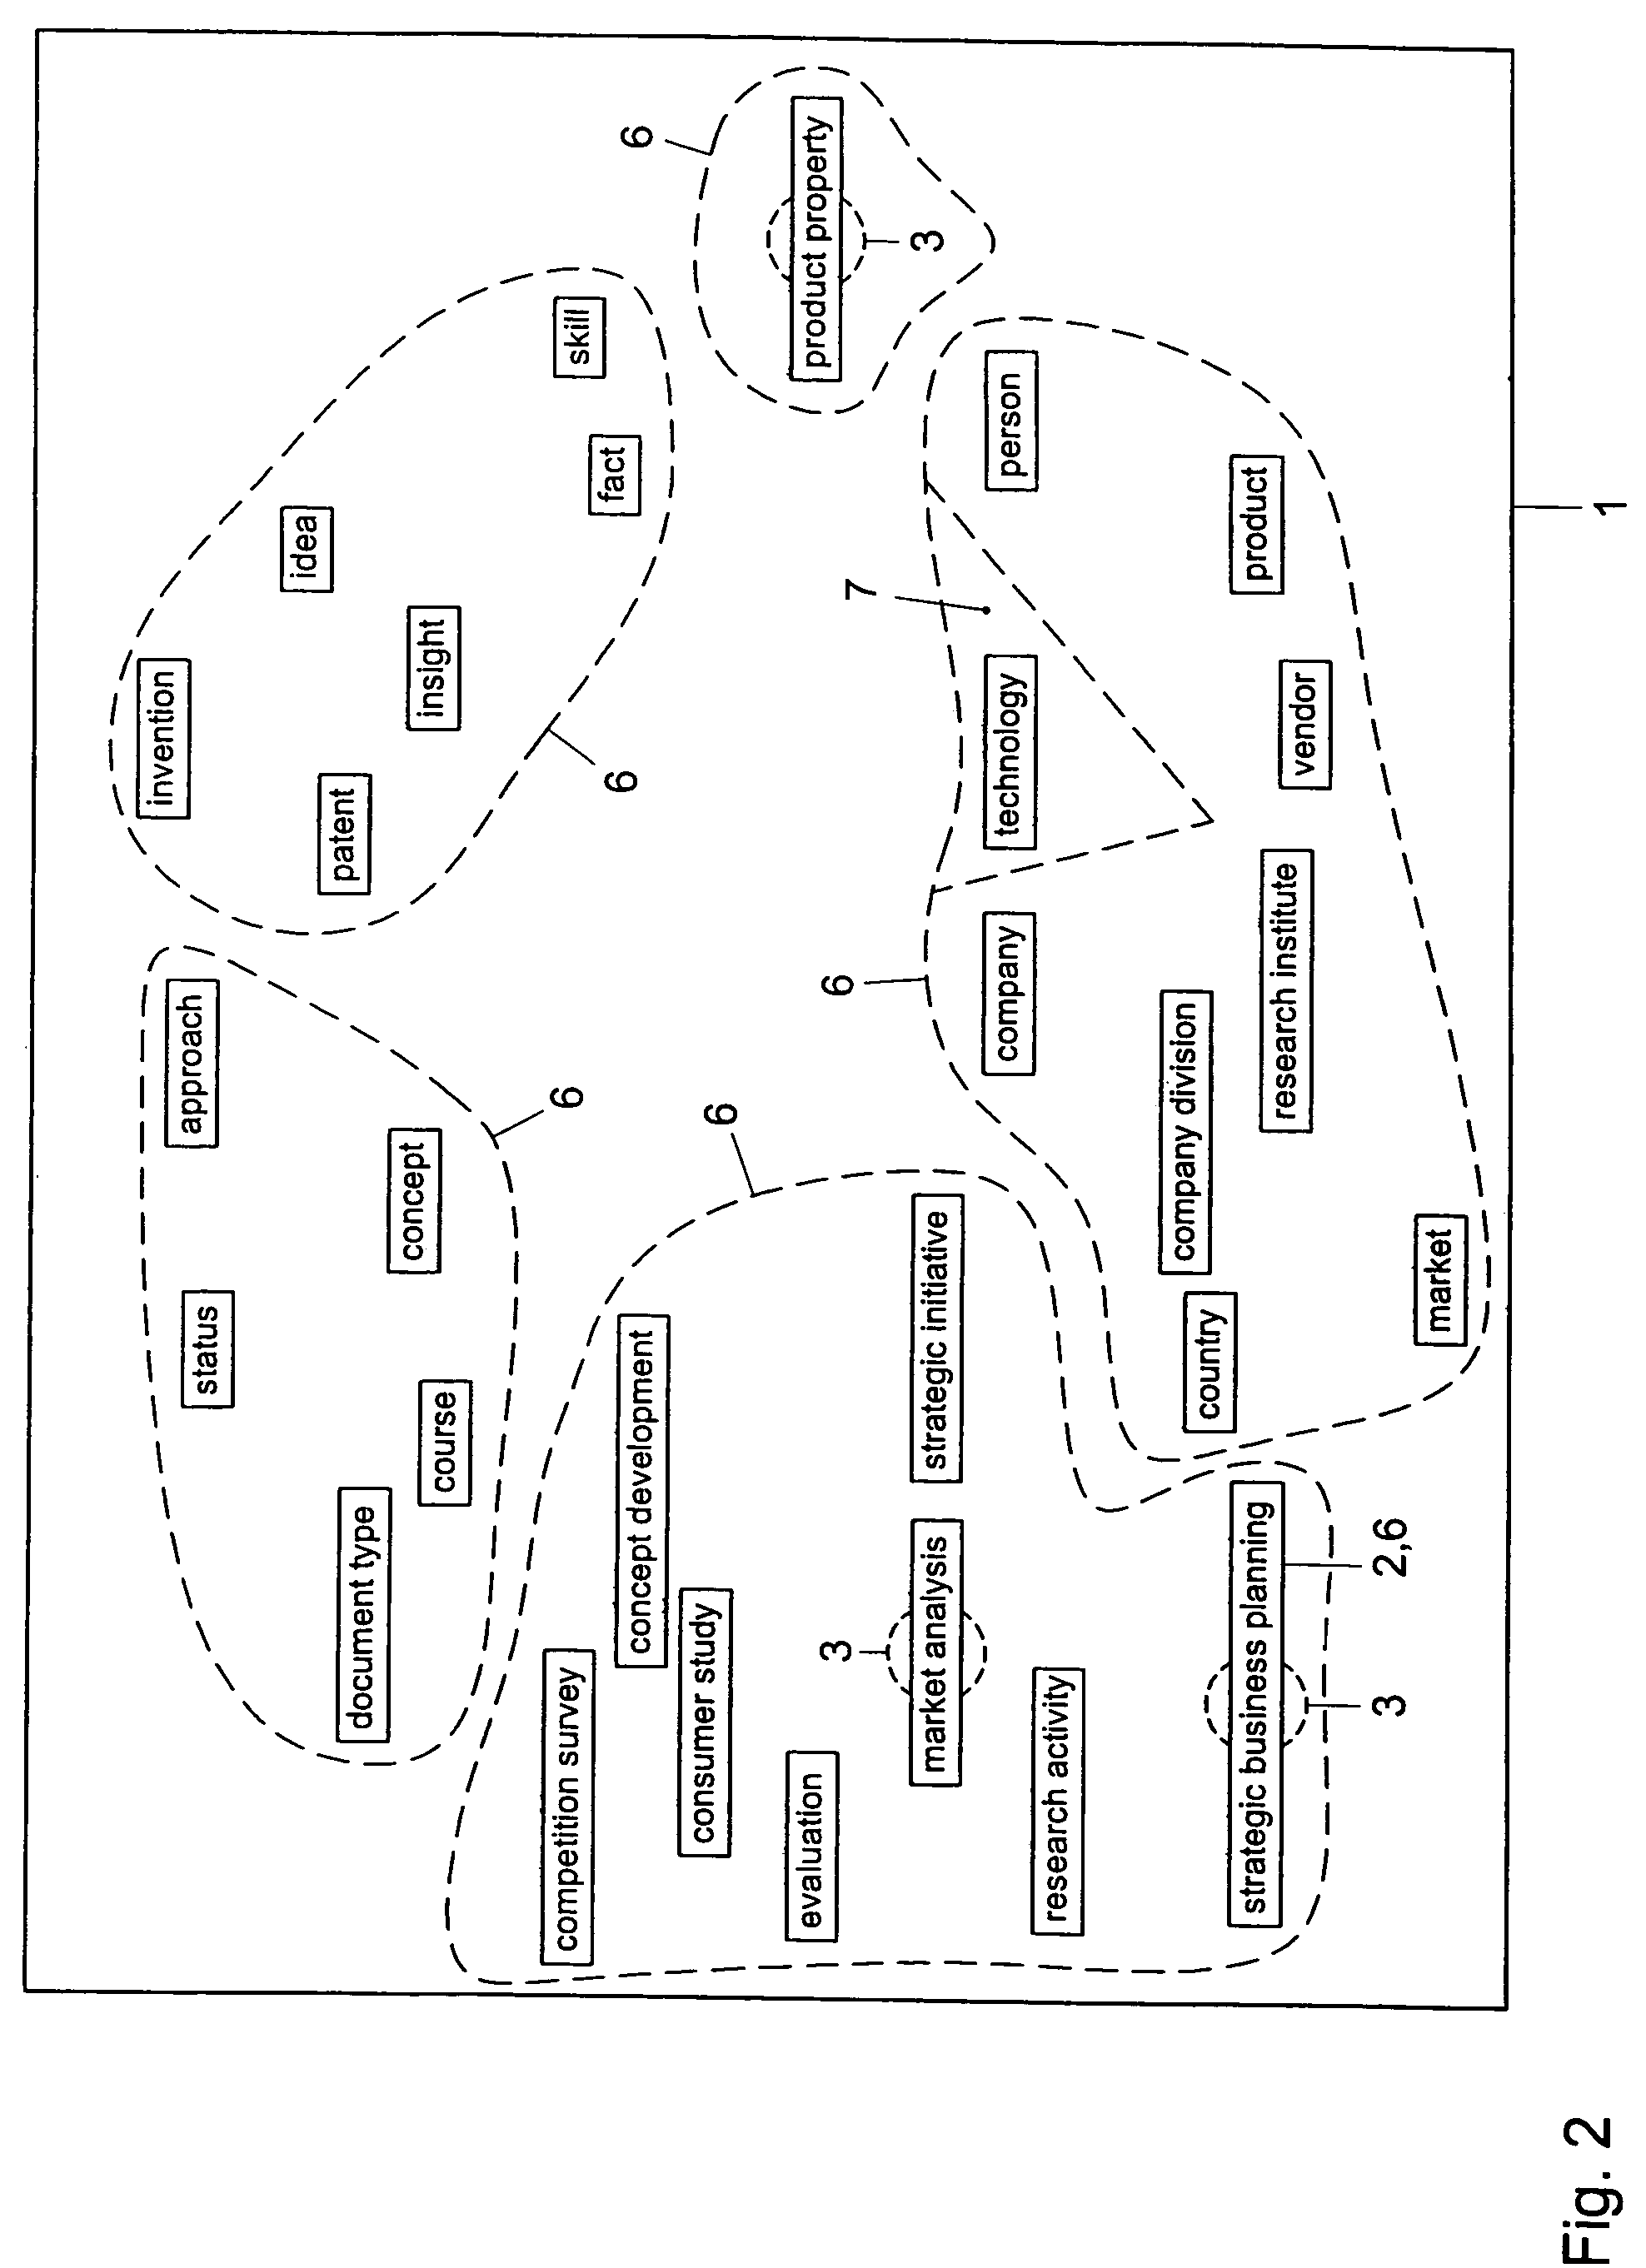 Method and system for providing an invisible attractor in a predetermined sector, which attracts a subset of entities depending on an entity type